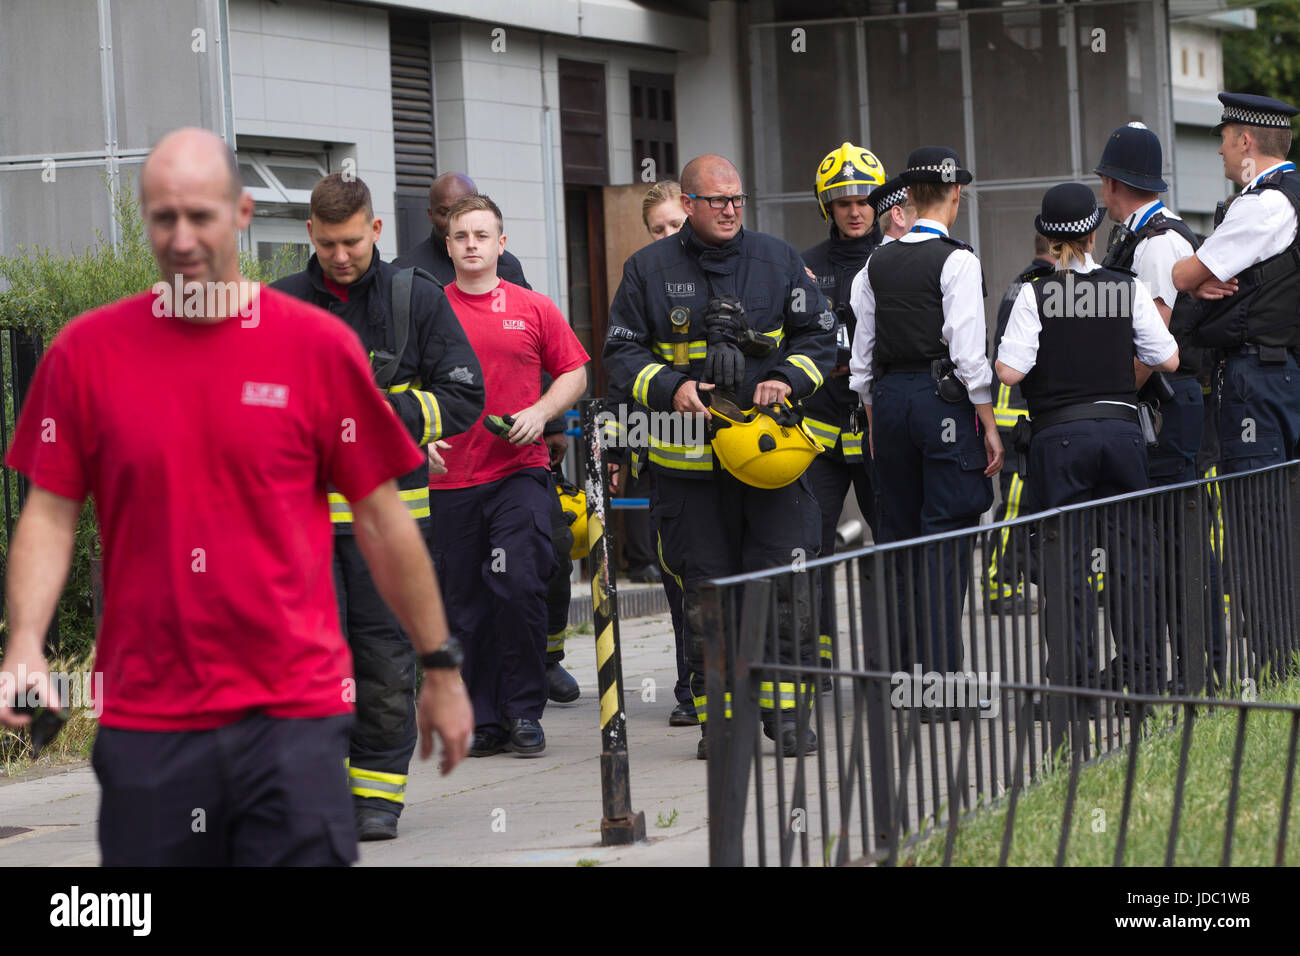 Fire Brigade officers search for a fire at Norland House, in White City nearby Grenfell Tower fire disaster, West London, UK Stock Photo